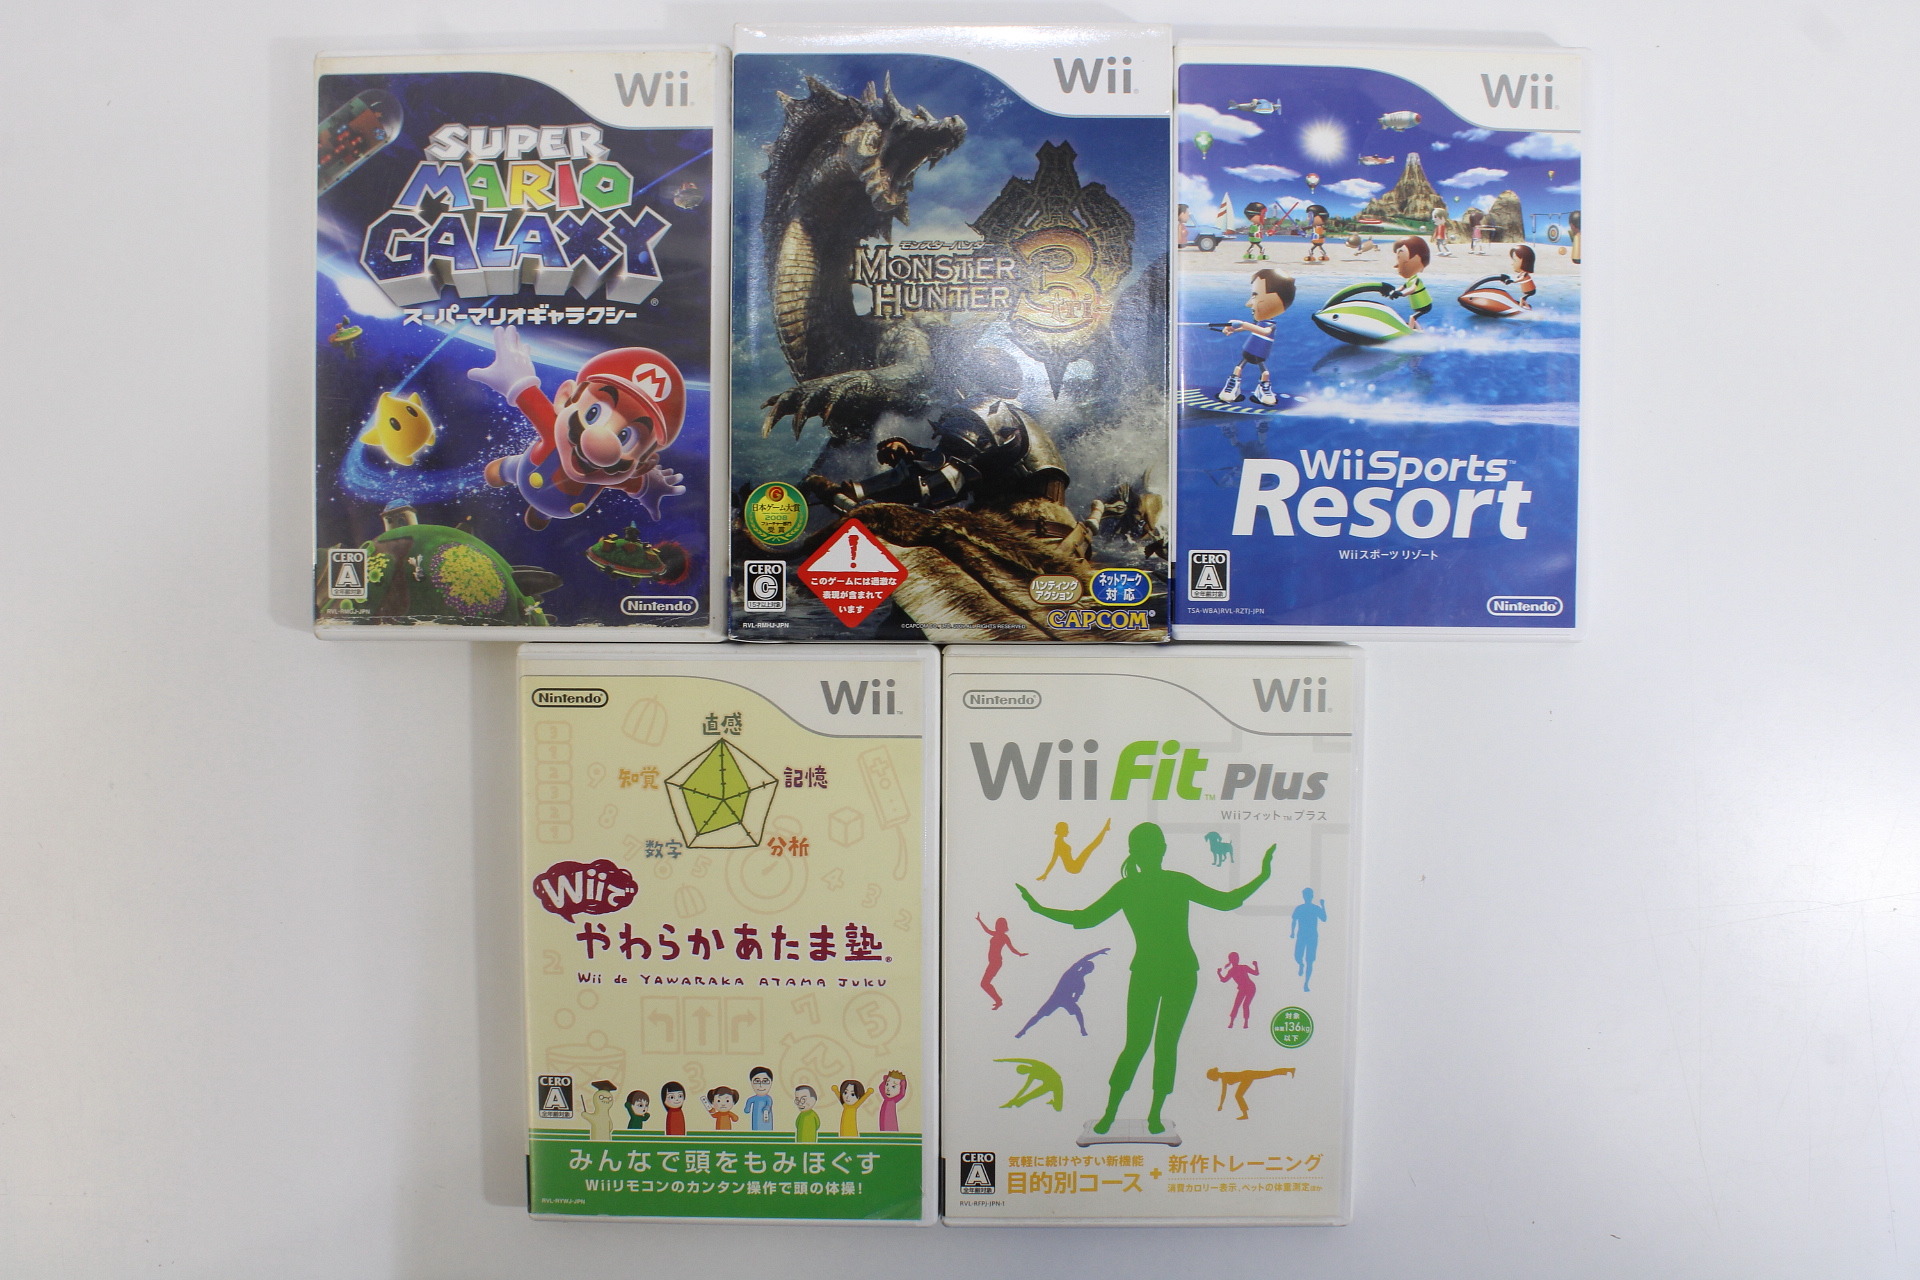 Wii Sports / Wii Sports Resort 2 Games on 1 Disc Wii Game